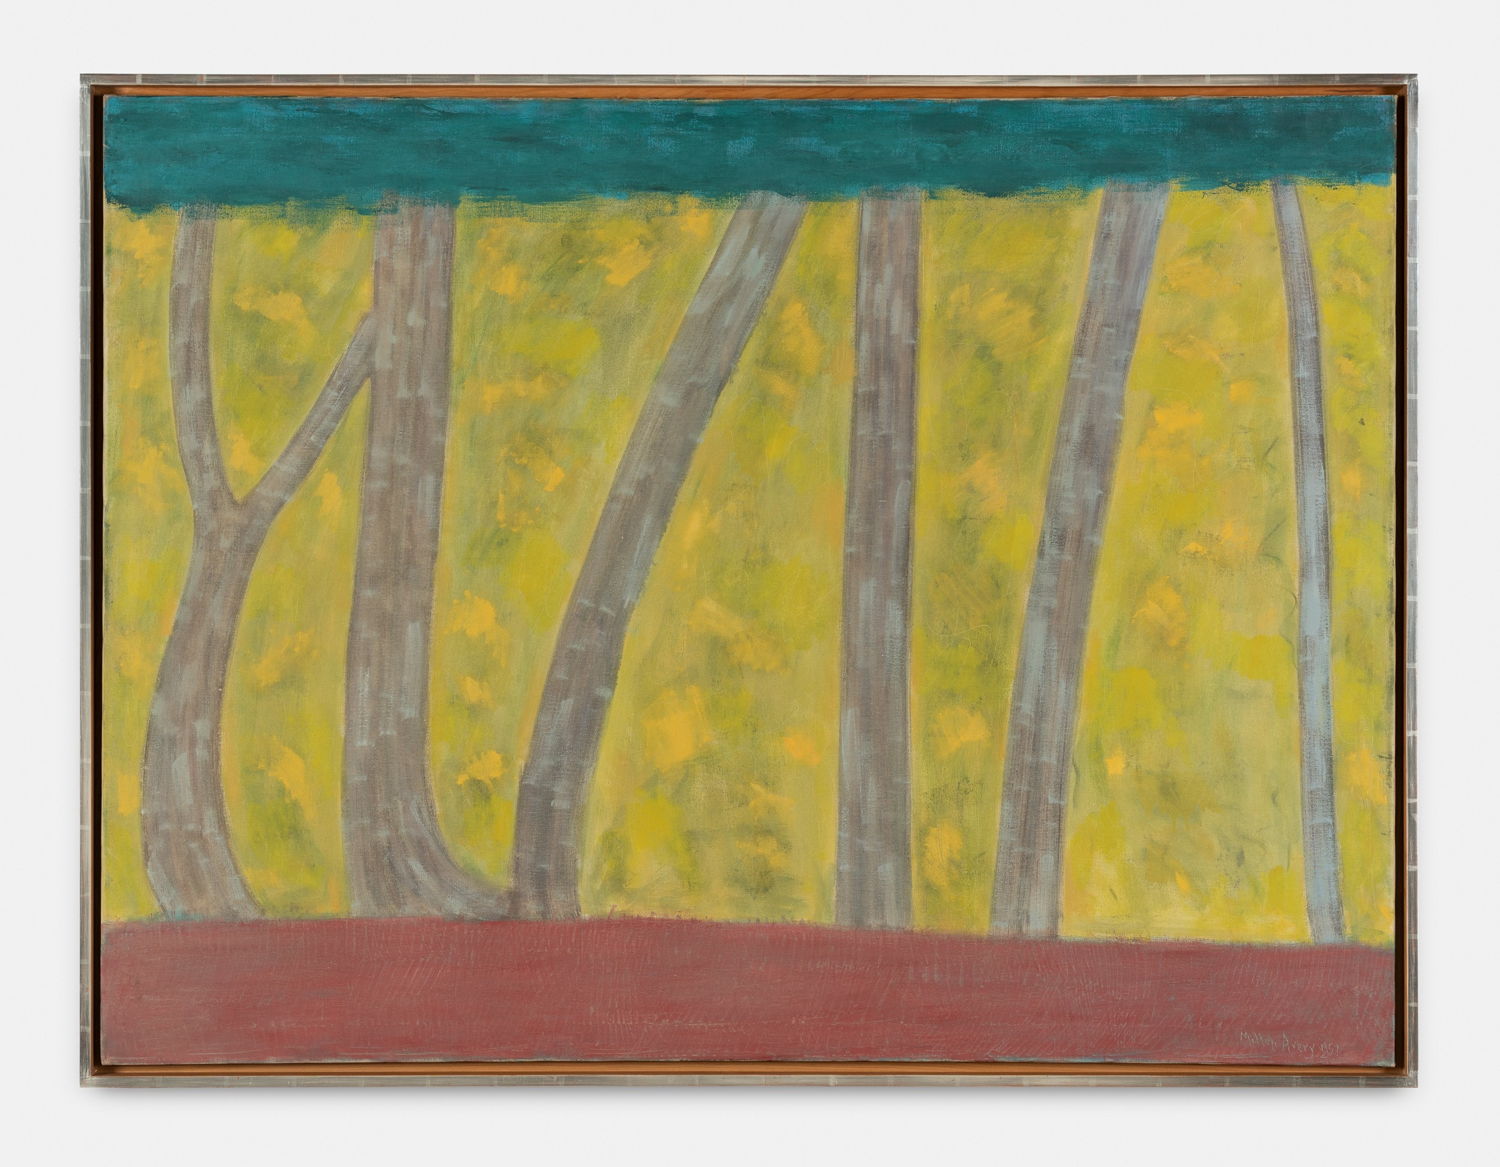 Milton Avery, Tree Trunks, 1957 oil on canvas 101.6 × 127 cm, 40 × 50 in. Photo credit: HV-studio Milton Avery Trust / Artists Rights Society (ARS), New York and DACS, London. Courtesy Xavier Hufkens, Brussels and Waqas Wajahat, New York